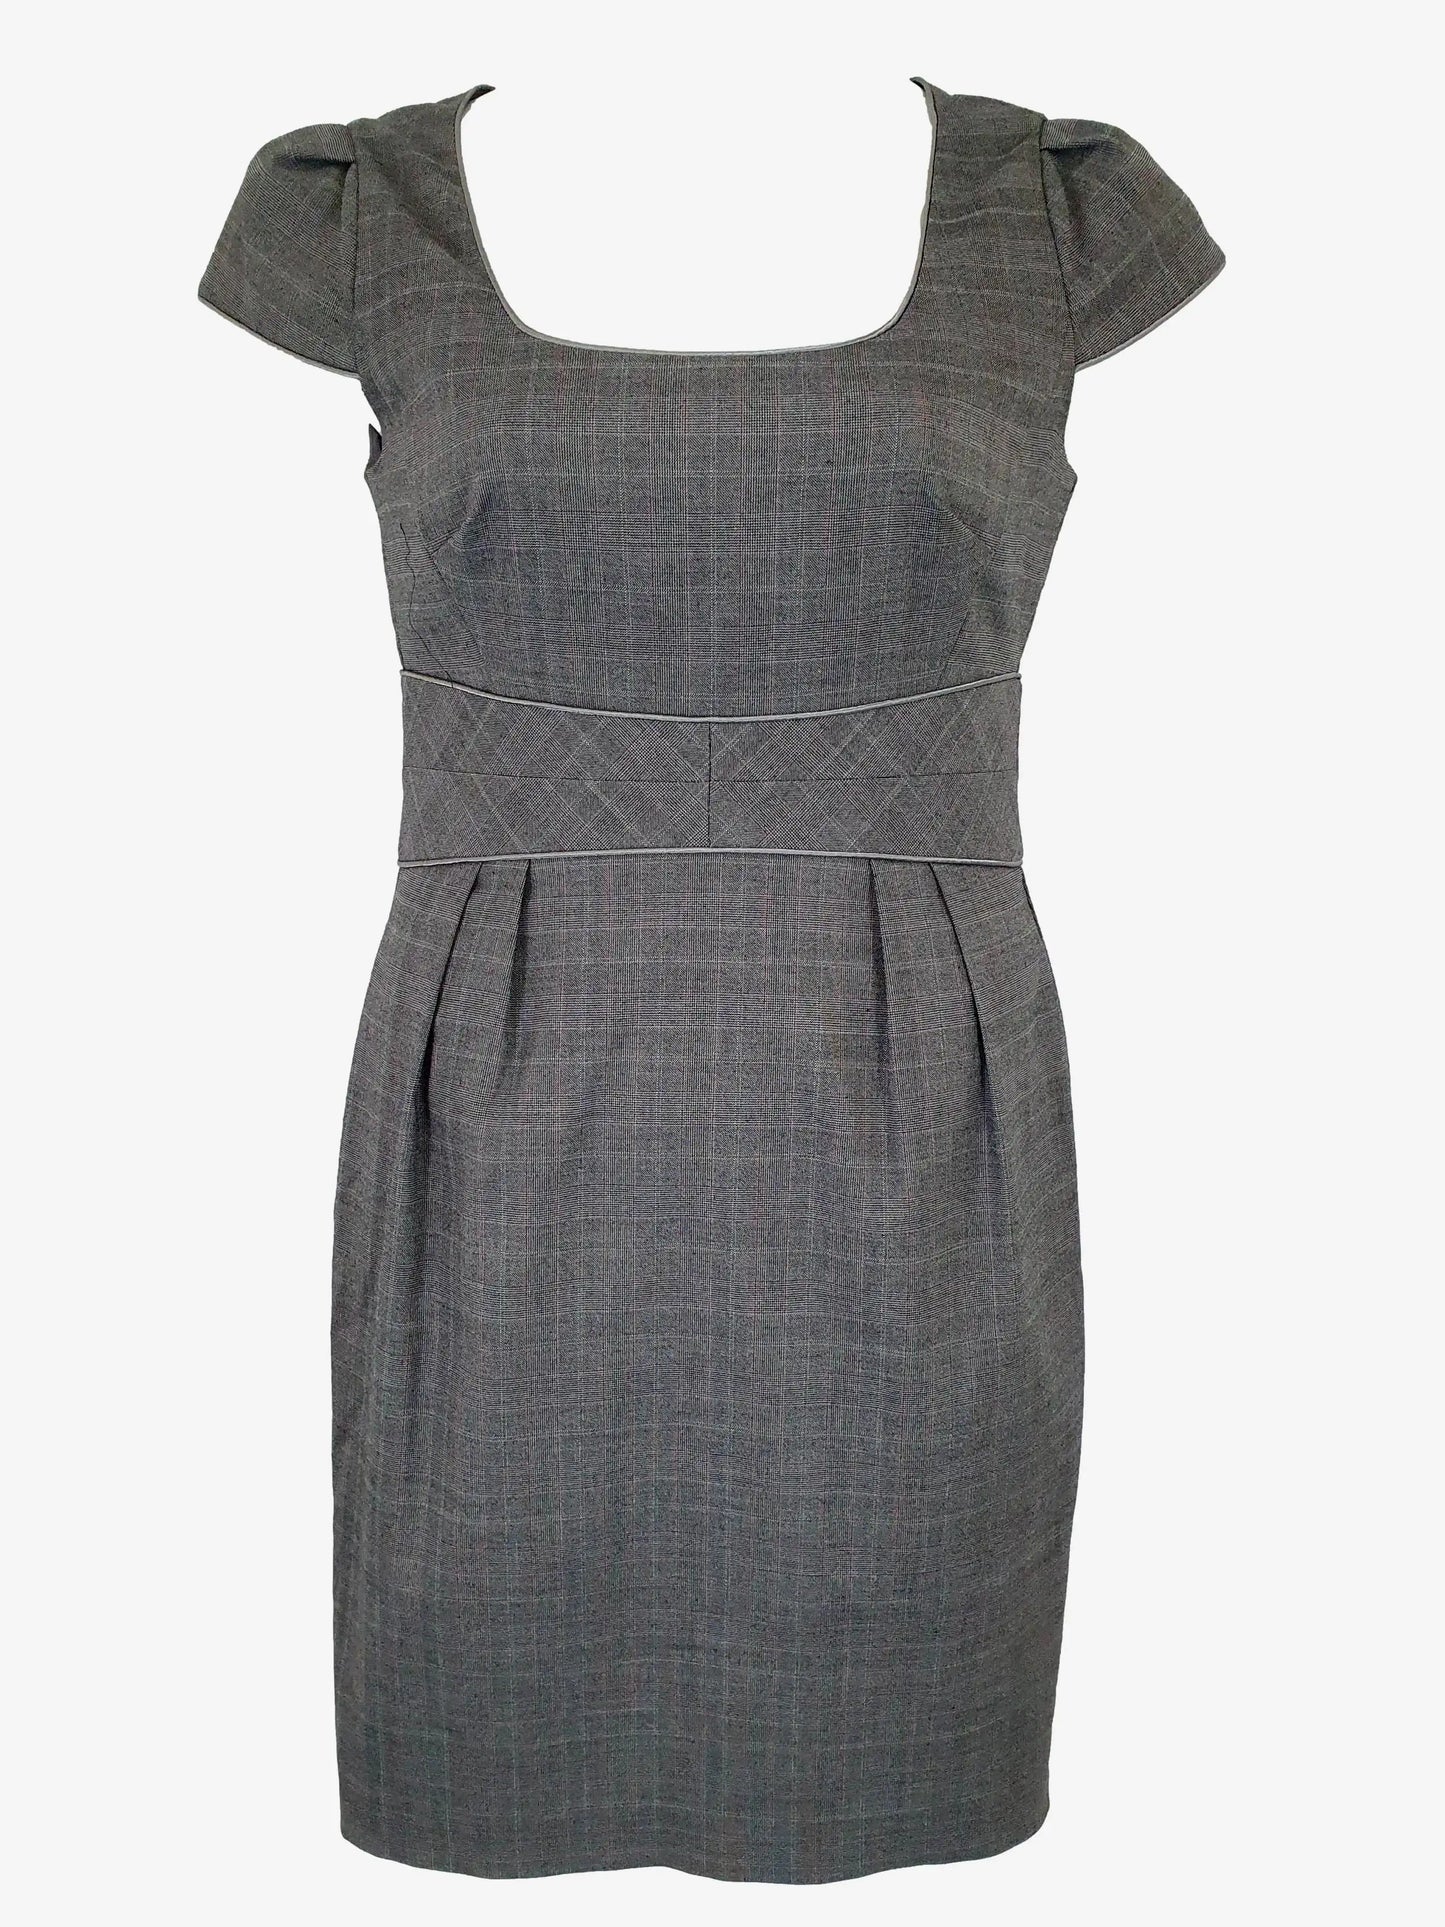 Tokito City Soft Plaid Office Midi Dress Size 12 by SwapUp-Second Hand Shop-Thrift Store-Op Shop 